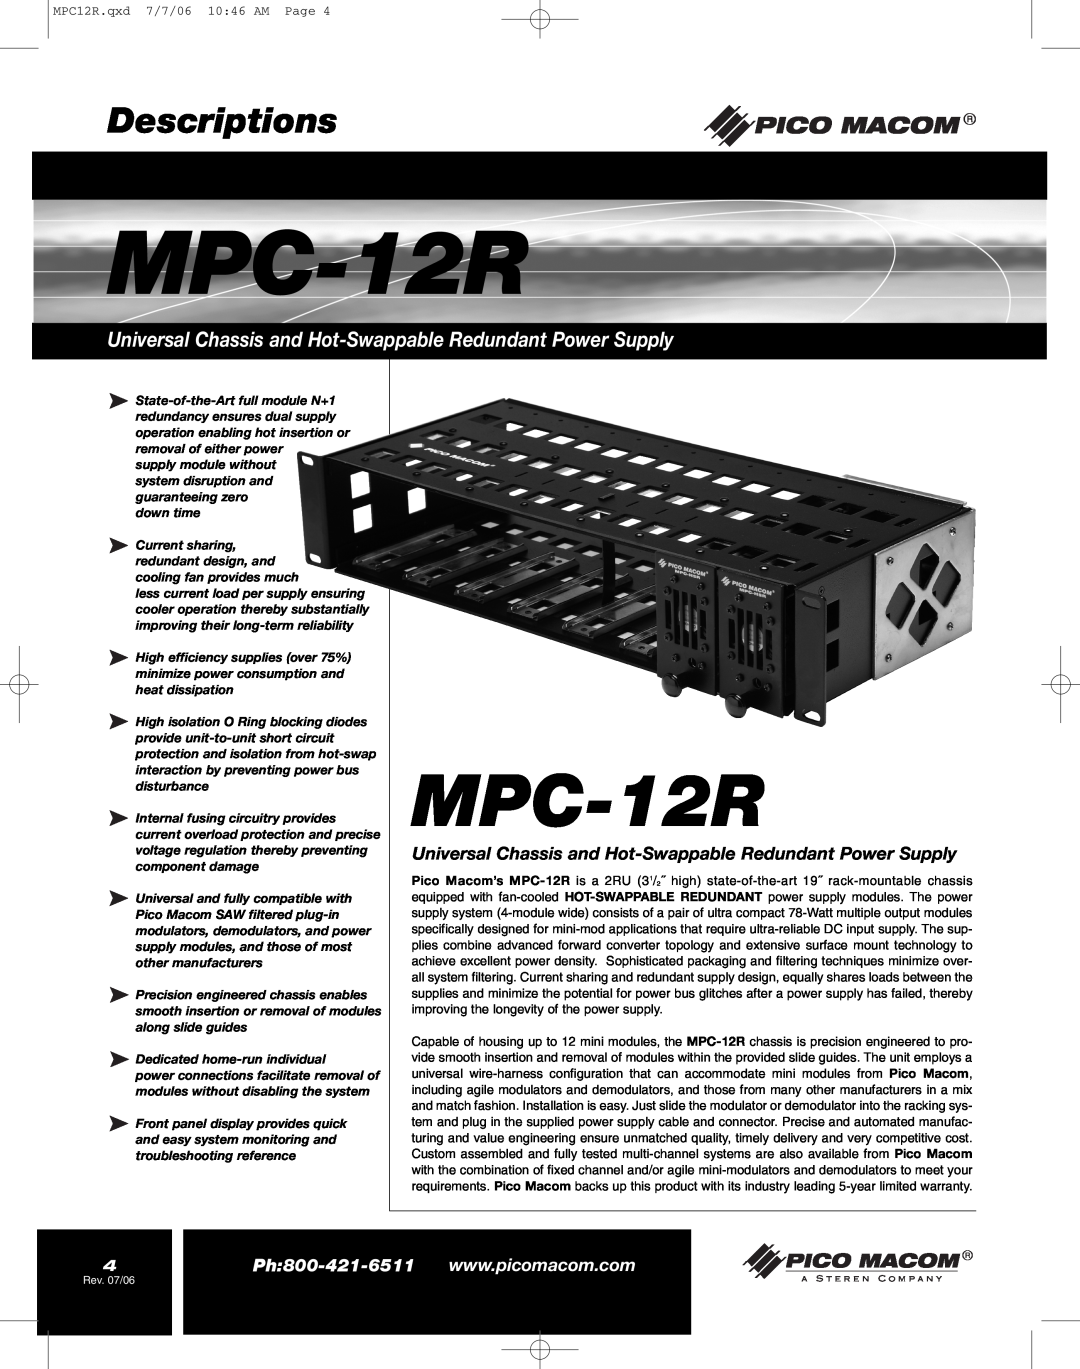 Pico Macom MPC-12R manual Descriptions, Universal Chassis and Hot-Swappable Redundant Power Supply 